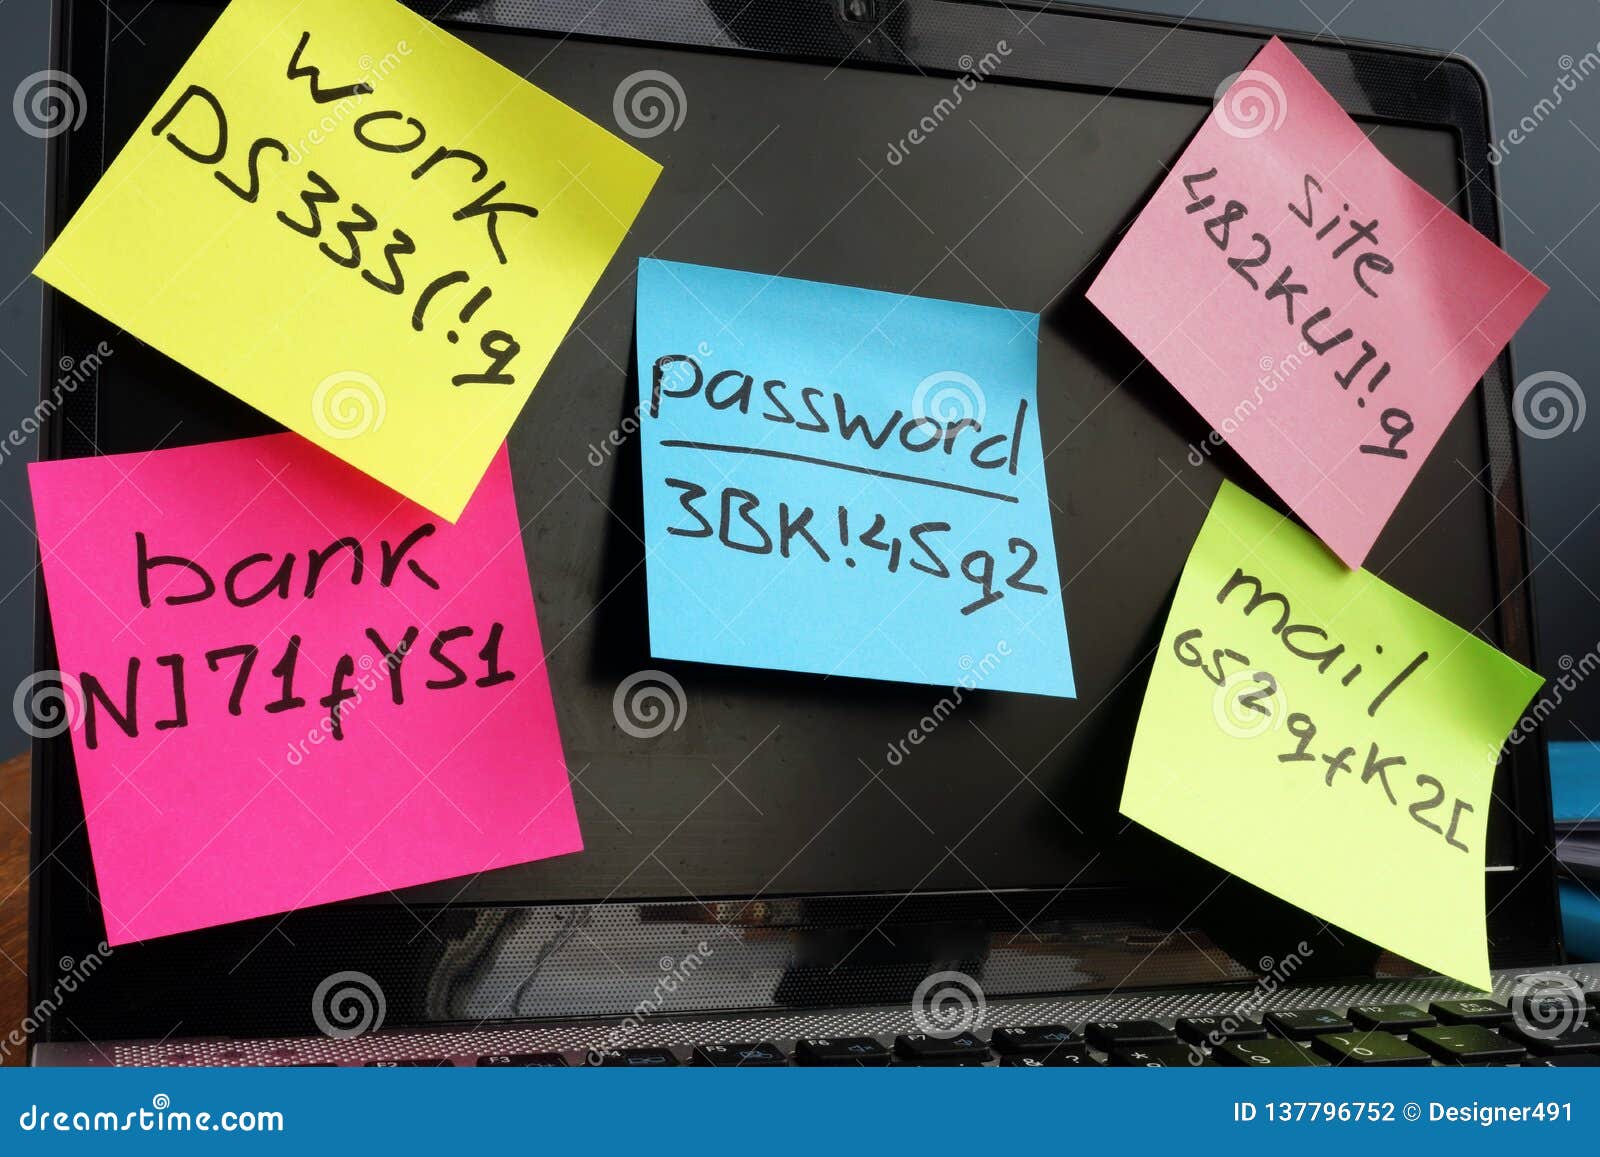 password management. laptop with memo sticks on screen